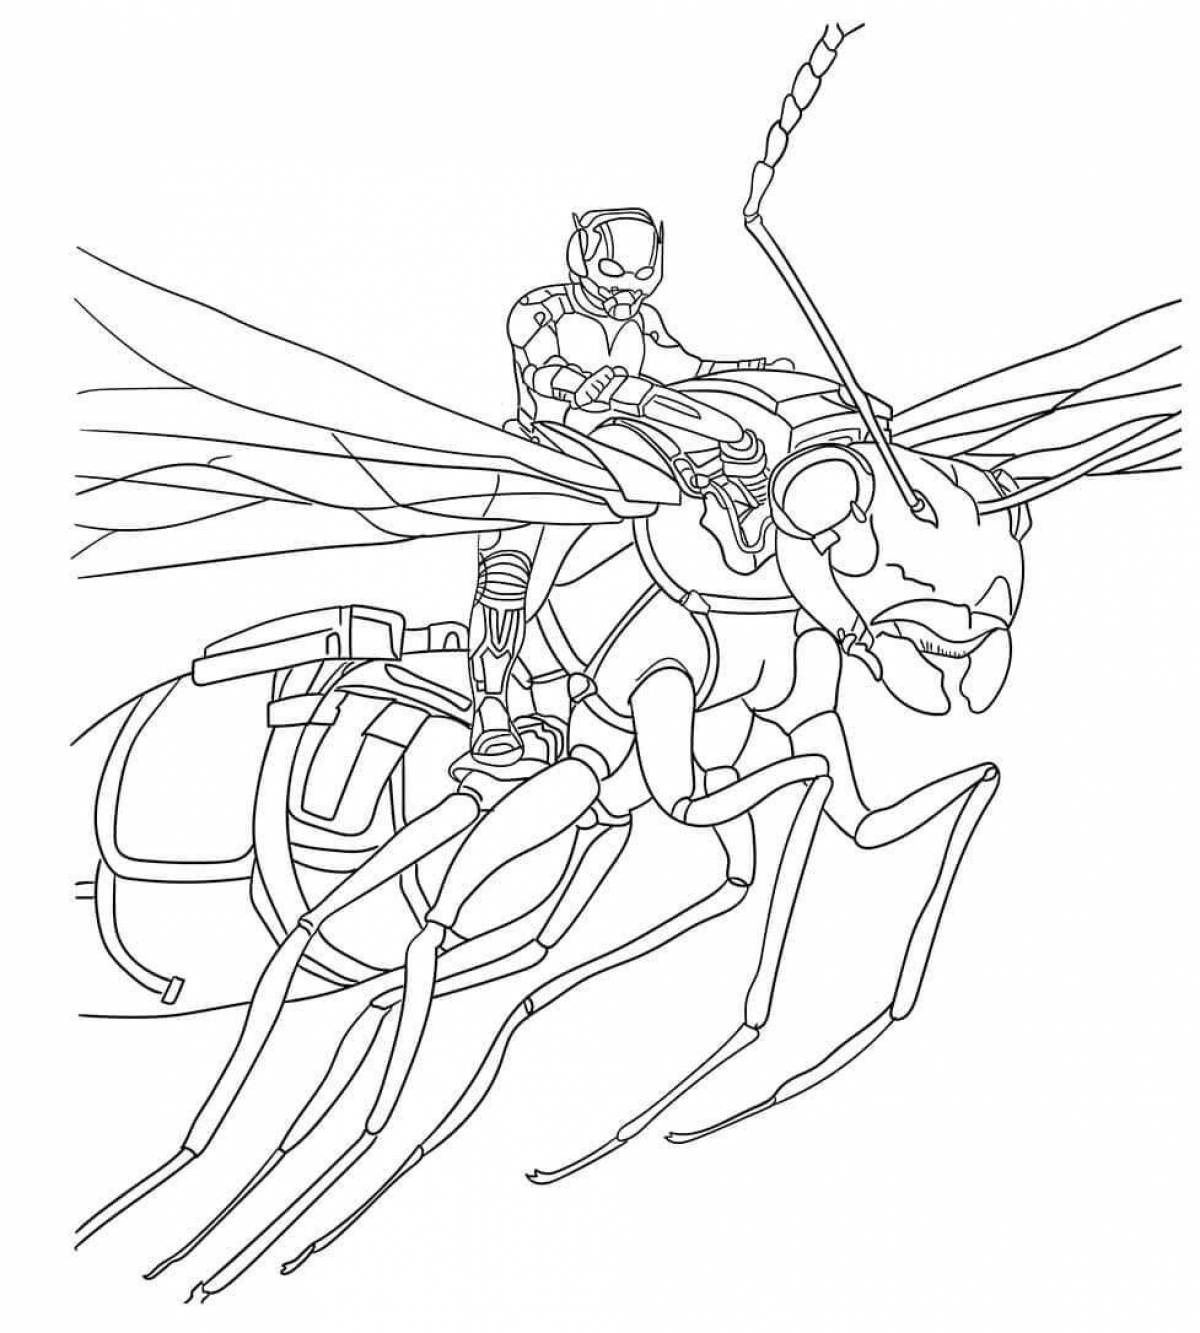 Coloring page happy ant-man